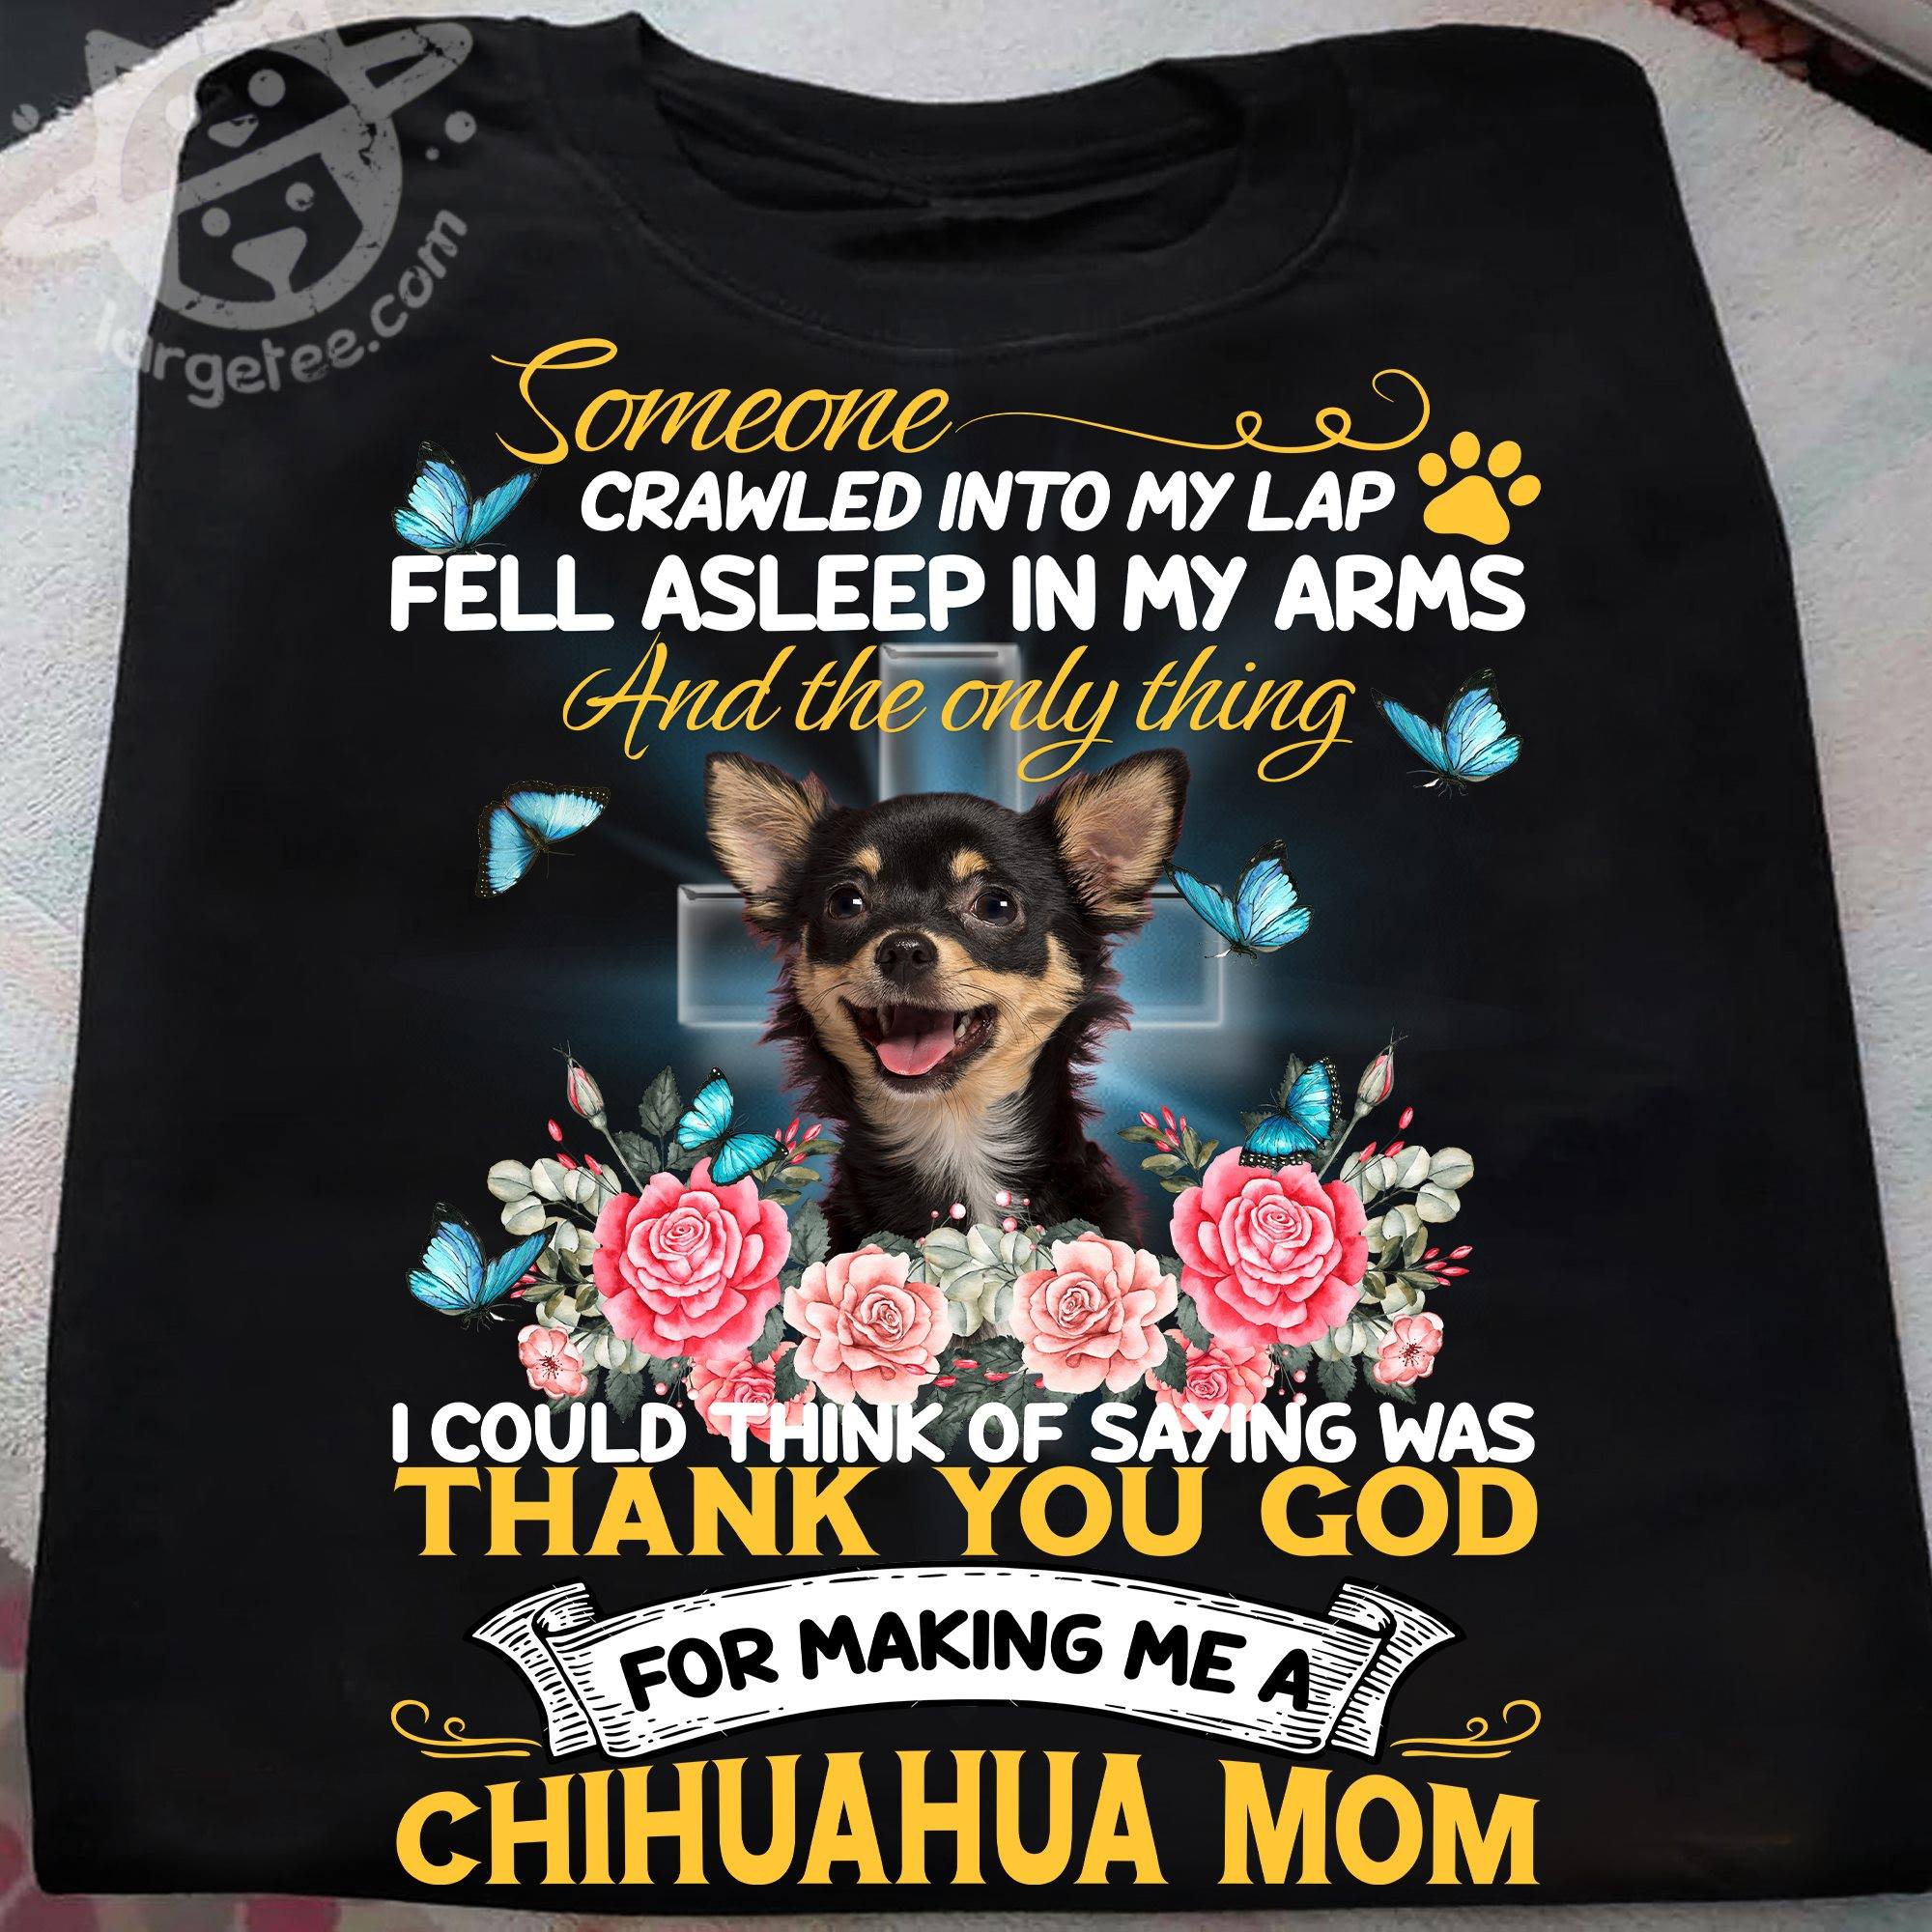 Someone crawled into my lap fell asleep in my arms and the only thing I could think of saying was thank you god - Chihuahua dog